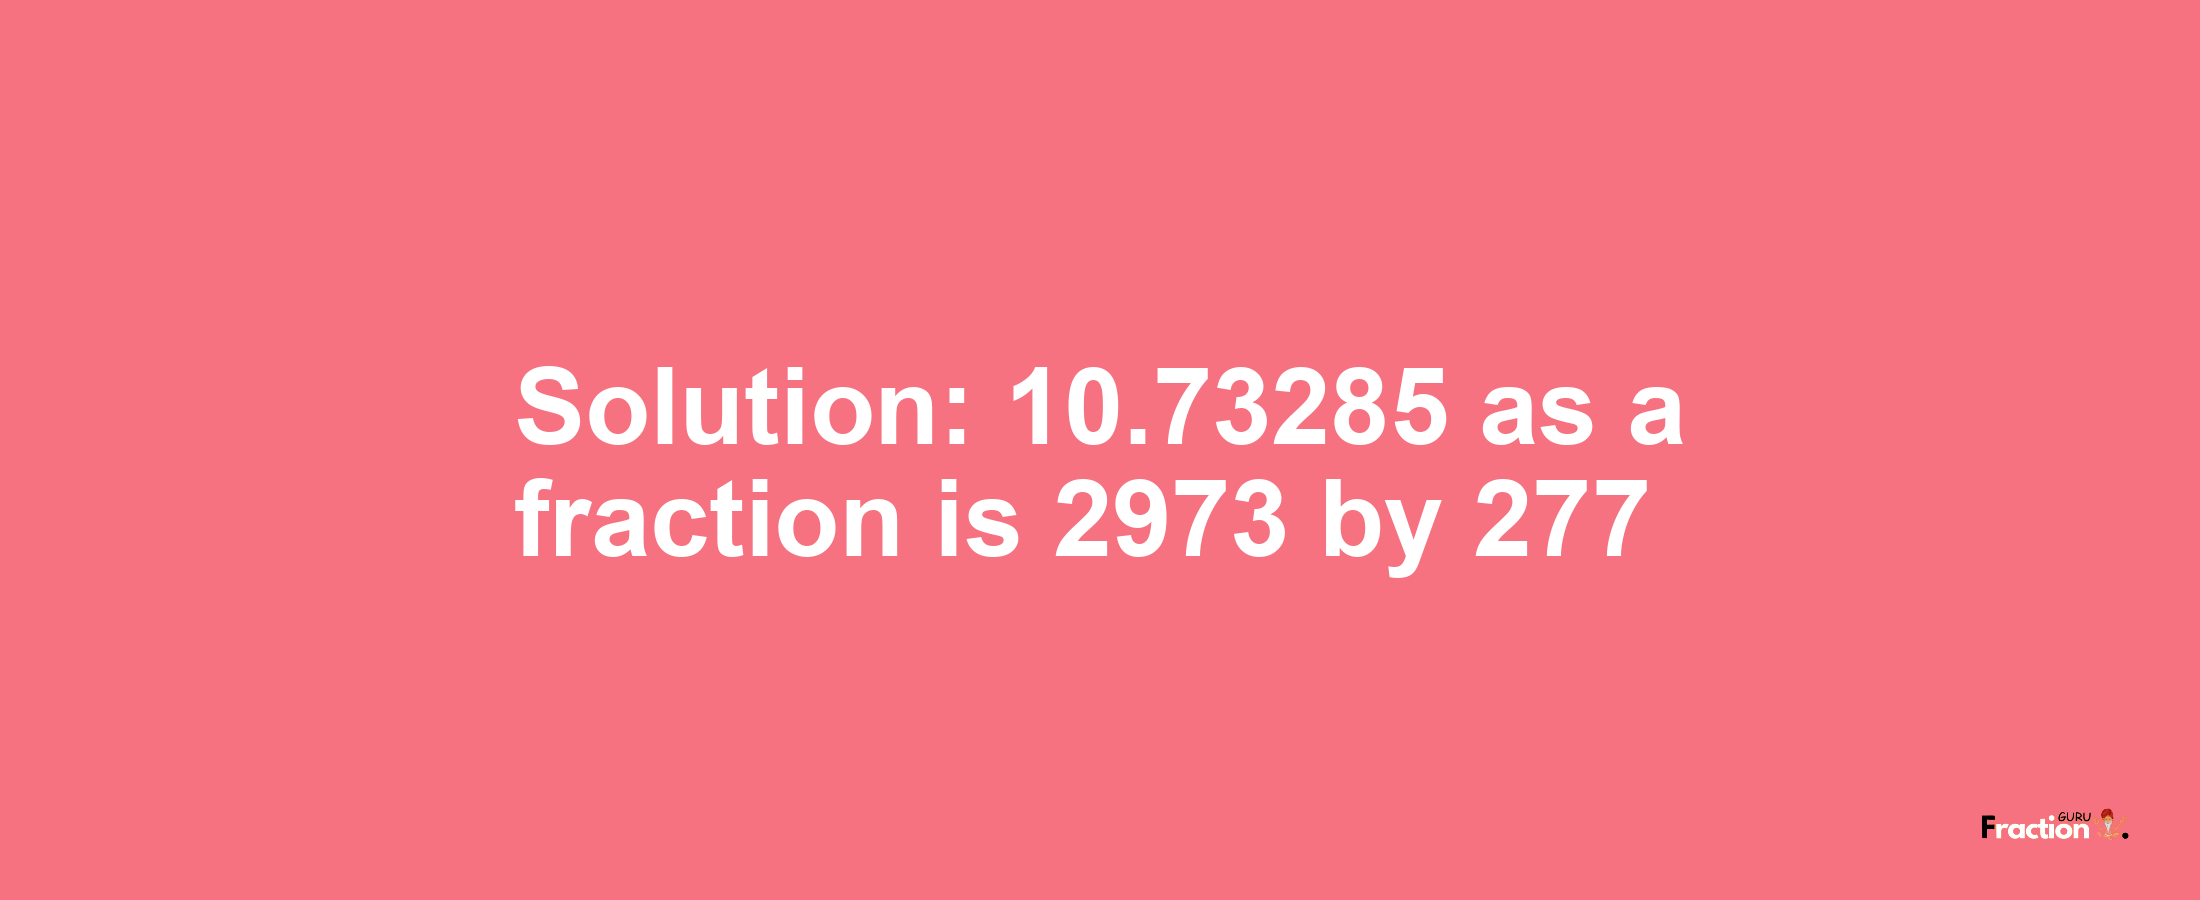 Solution:10.73285 as a fraction is 2973/277